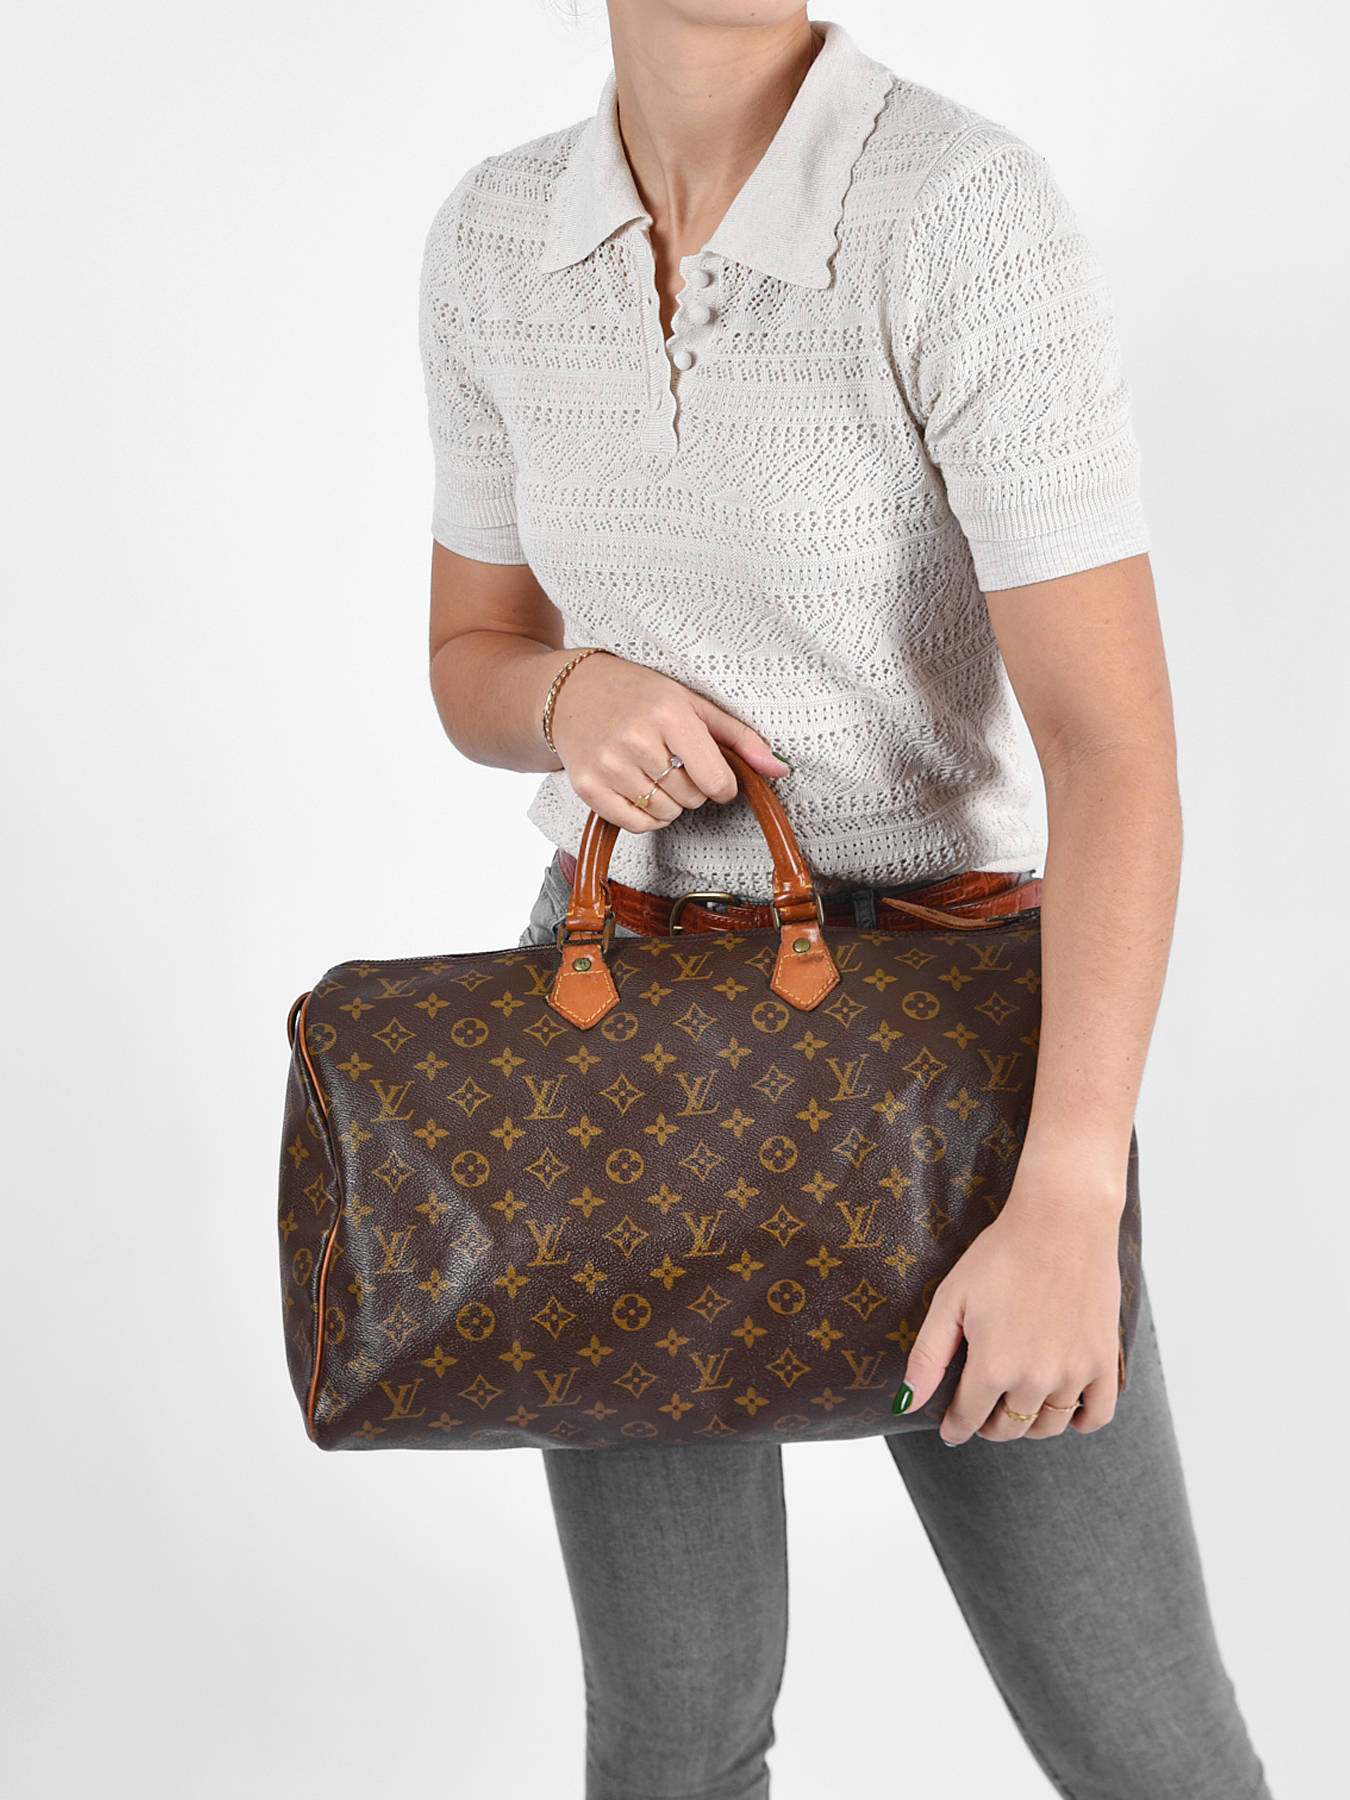 Buy PRE OWNED LOUIS VUITTON BAGS WALLETS AND ACCESSORIES Online